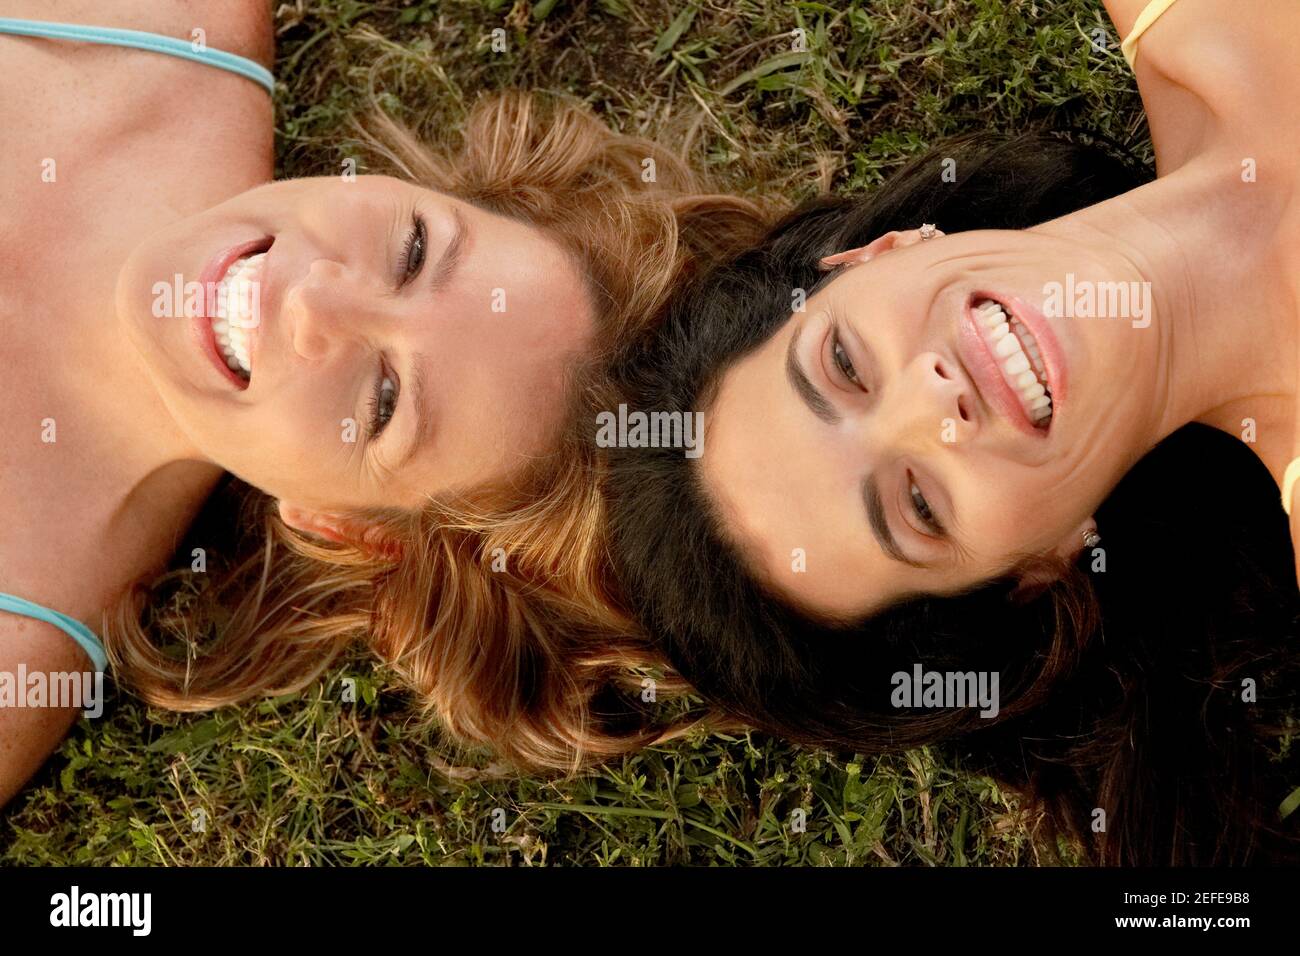 High angle view of a mid adult woman with a mature woman lying on the grass Stock Photo